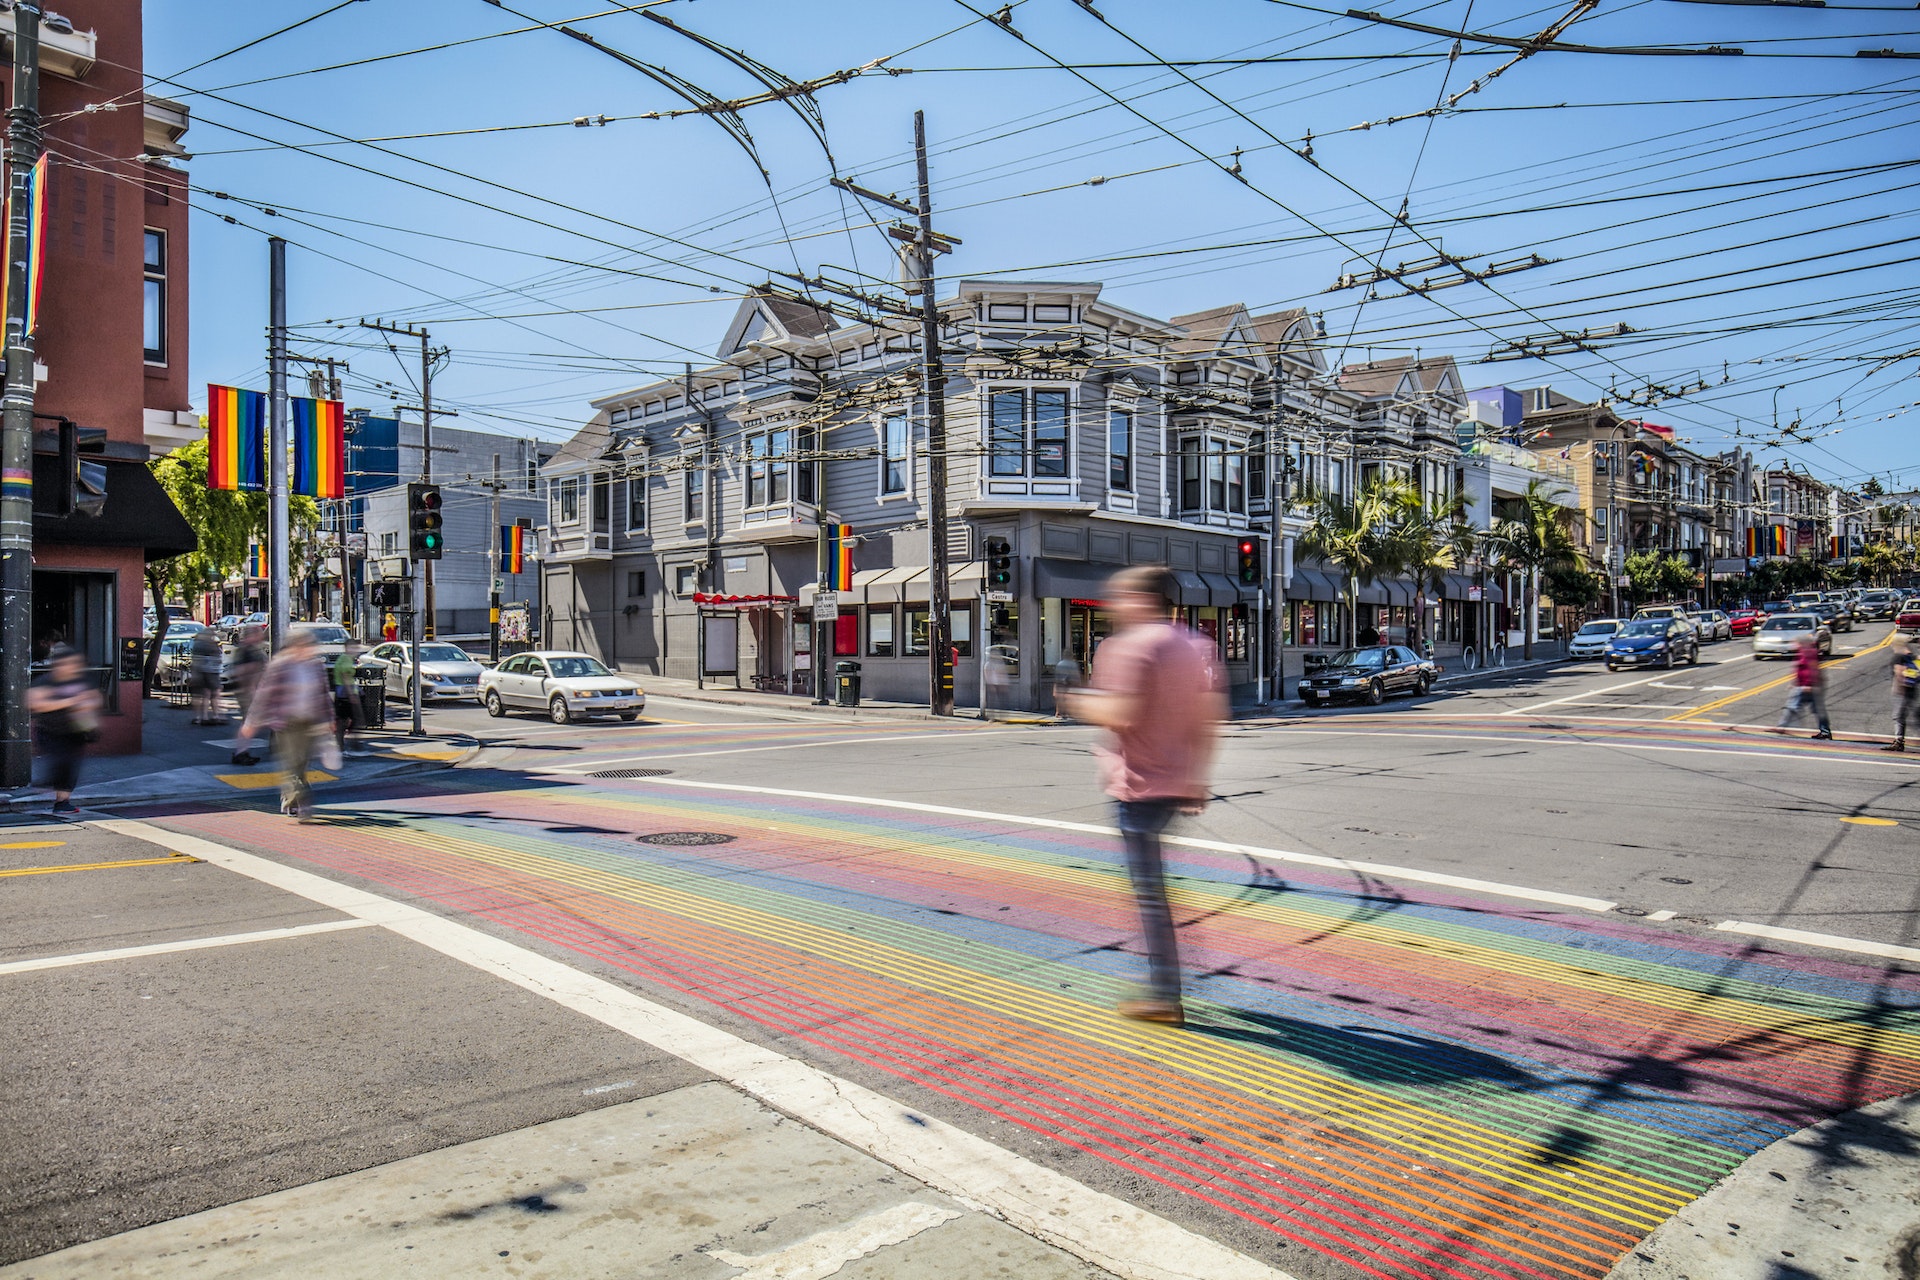 People cross the road on a rainbow-colored crosswalk in a city neighborhood. Rainbow flags fly from buildings